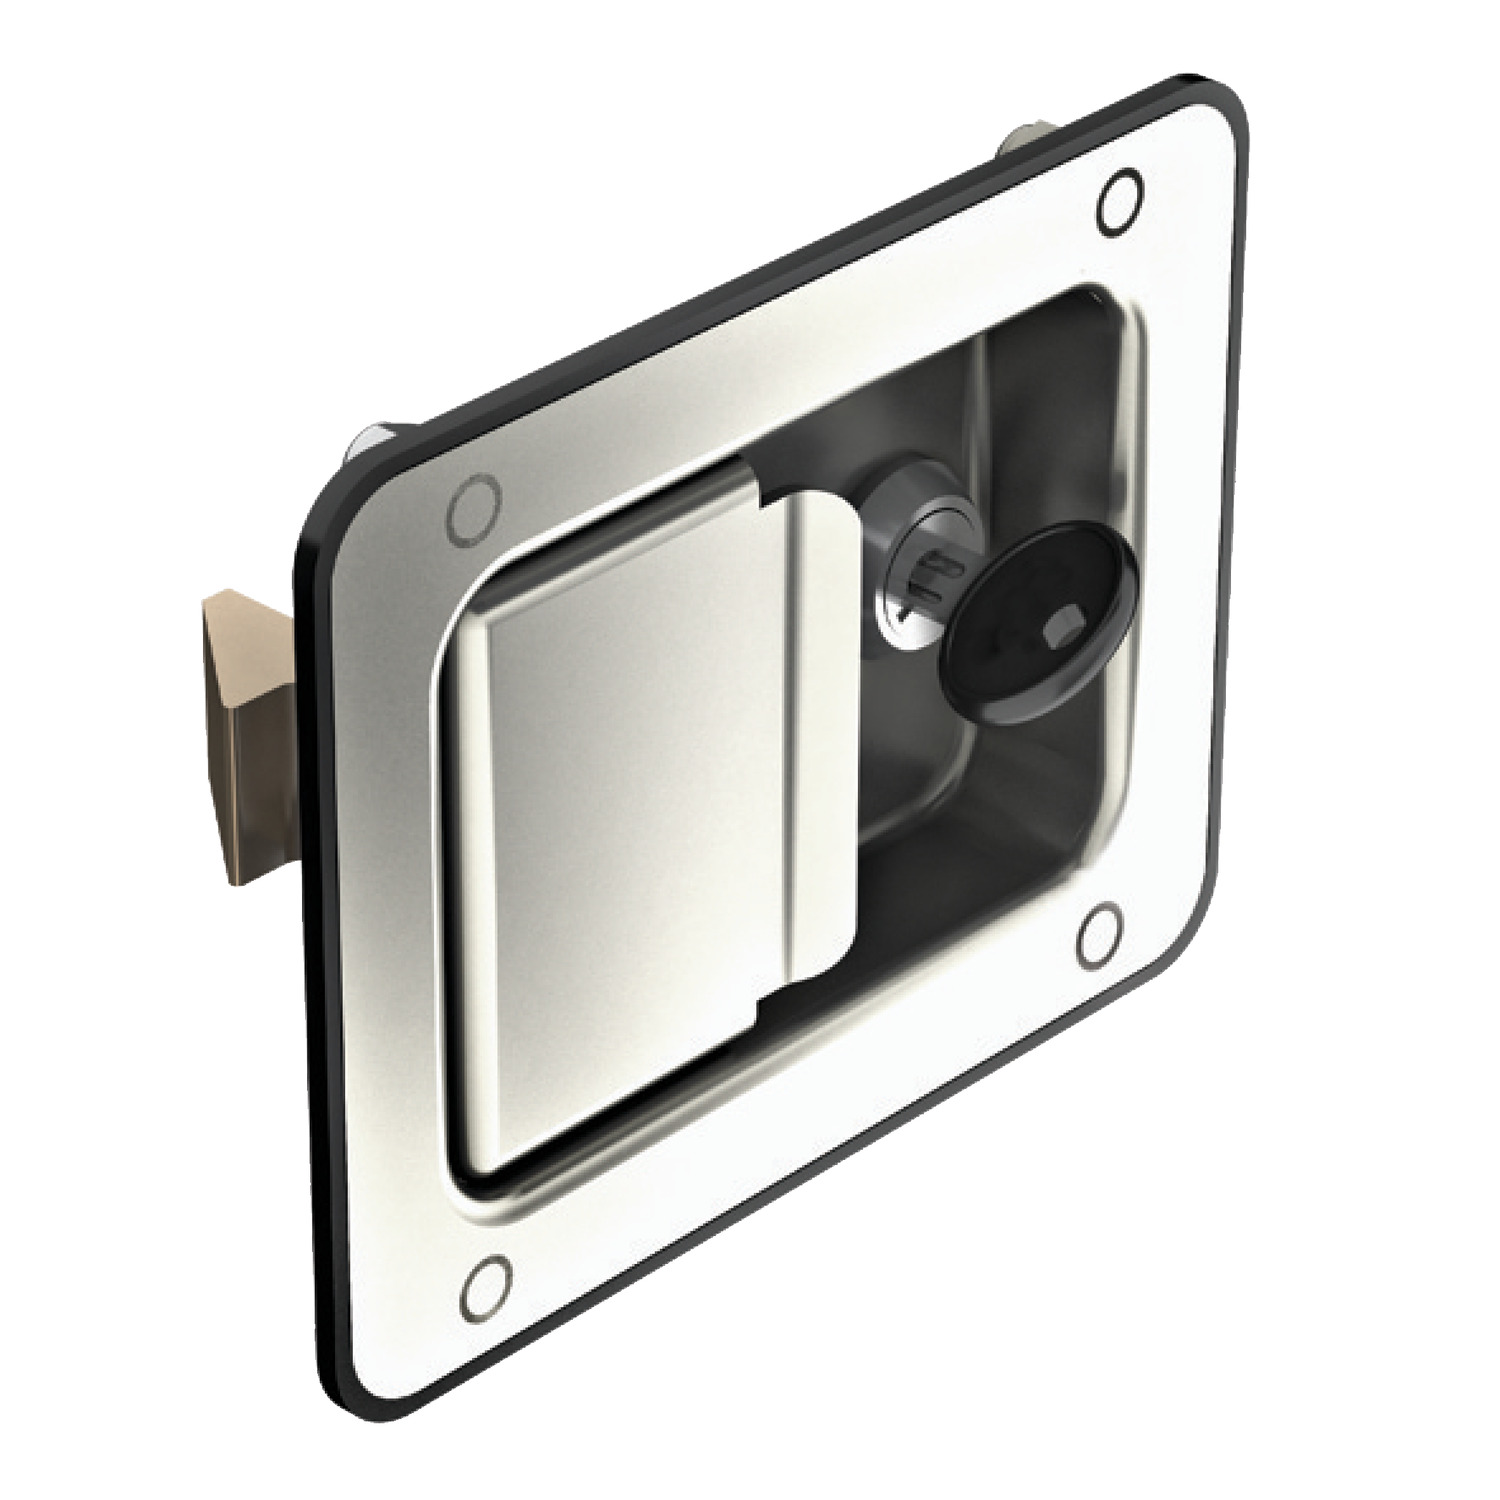 Push To Close Paddle Latches Spring loaded, slam action handle. Fully integrated lock, latch and flush fitting paddle handle. Made in Stainless Steel.